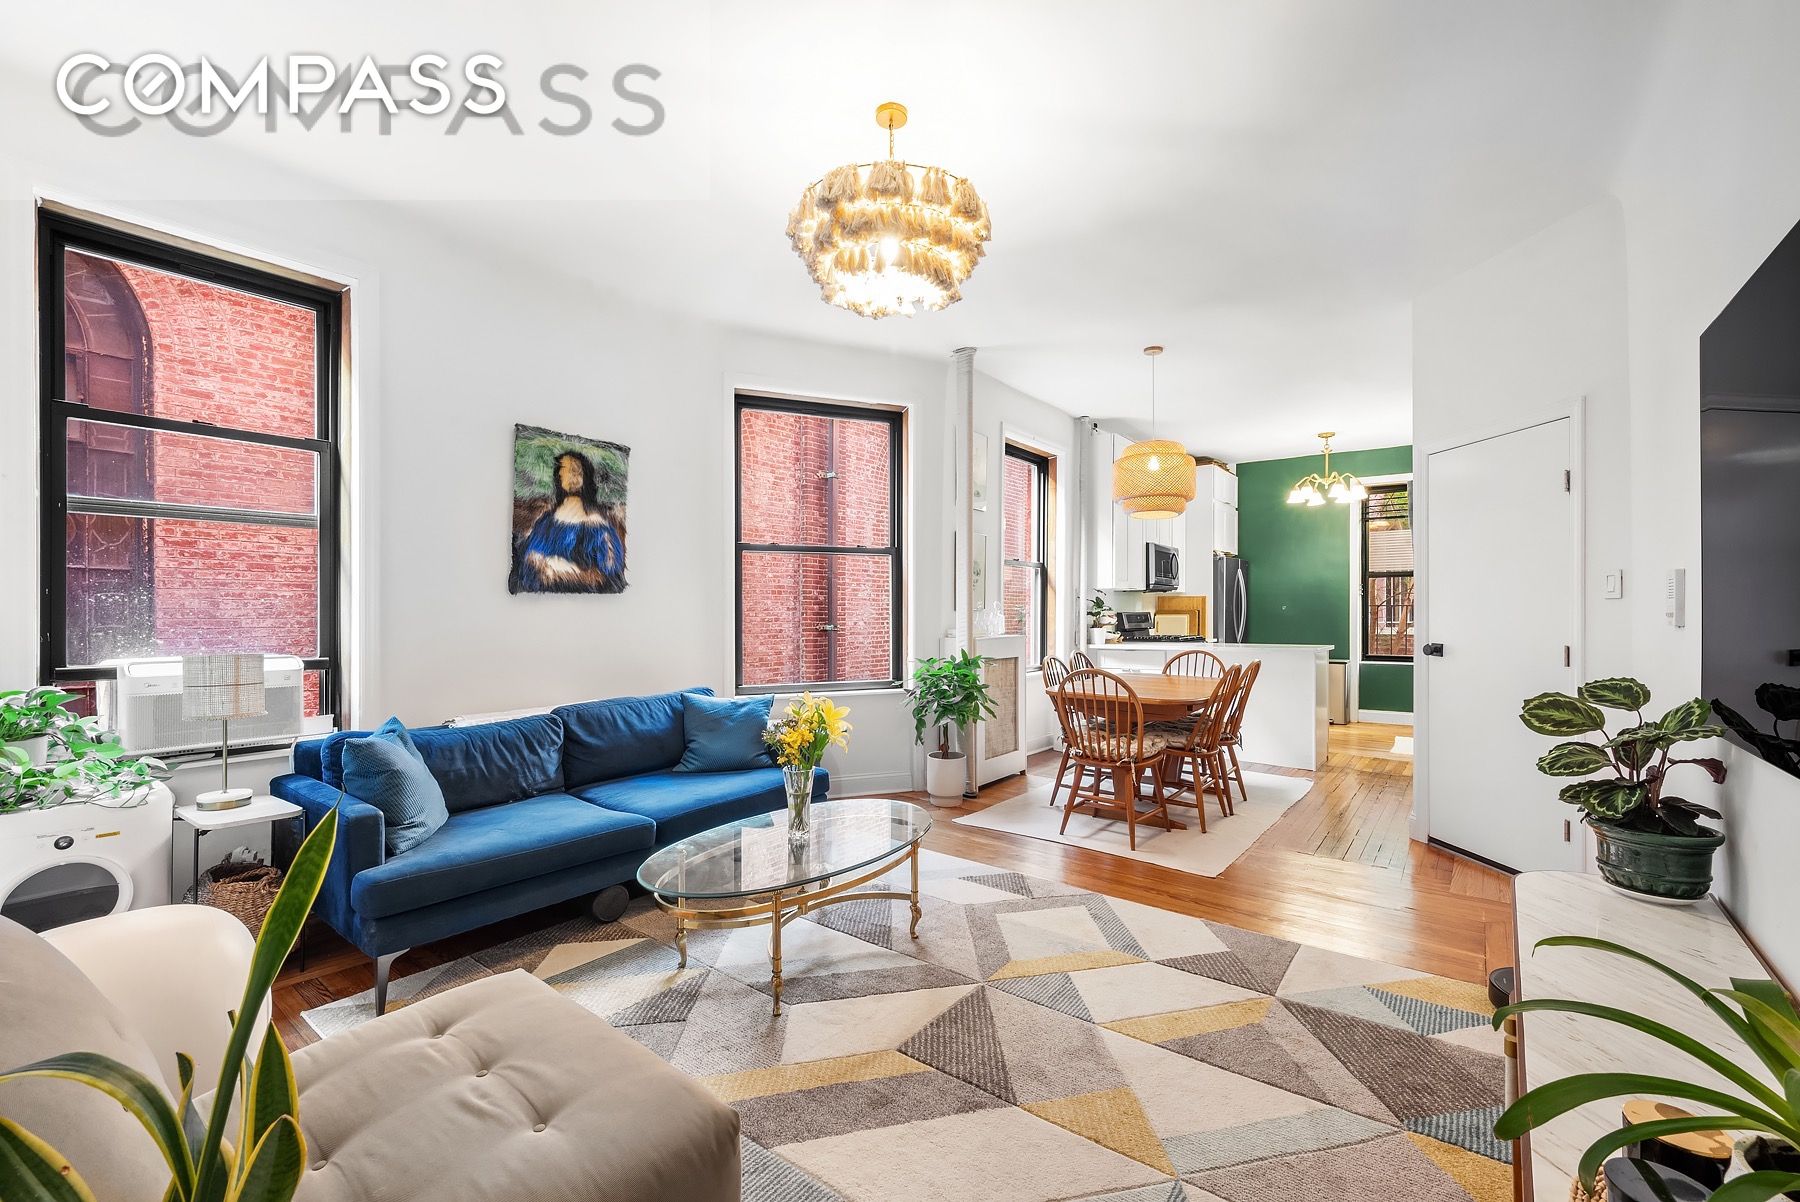 211 West 107th Street 2W, Upper West Side, Upper West Side, NYC - 3 Bedrooms  
1.5 Bathrooms  
5 Rooms - 